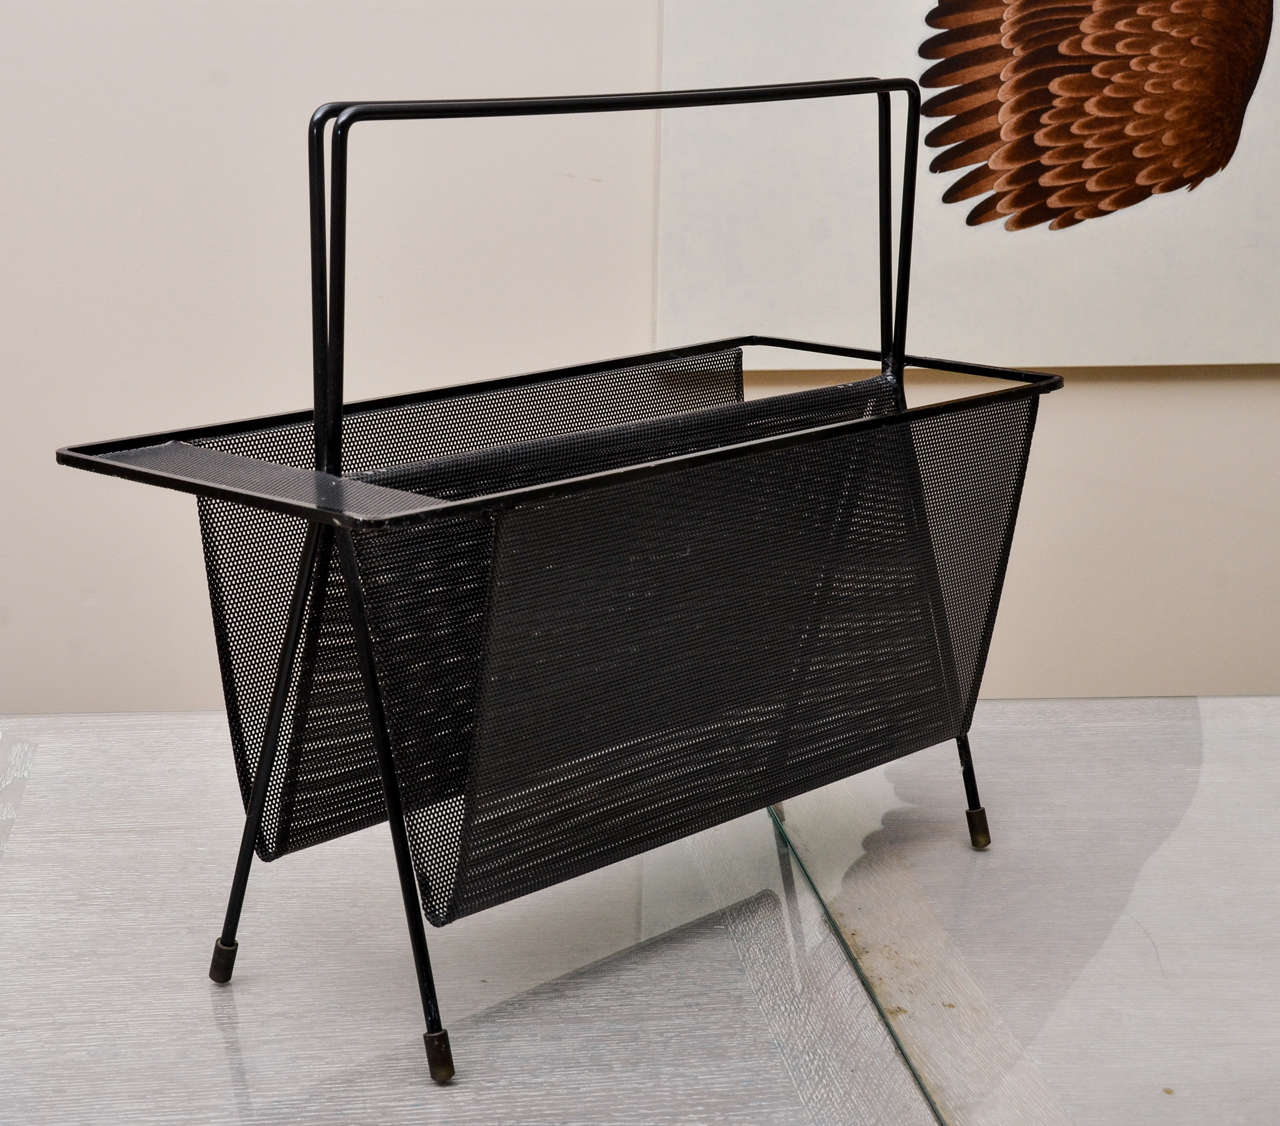 The nicest Mategot magazine rack we have ever seen. Classic Mategot perforated metal in black, with bronze sabots.